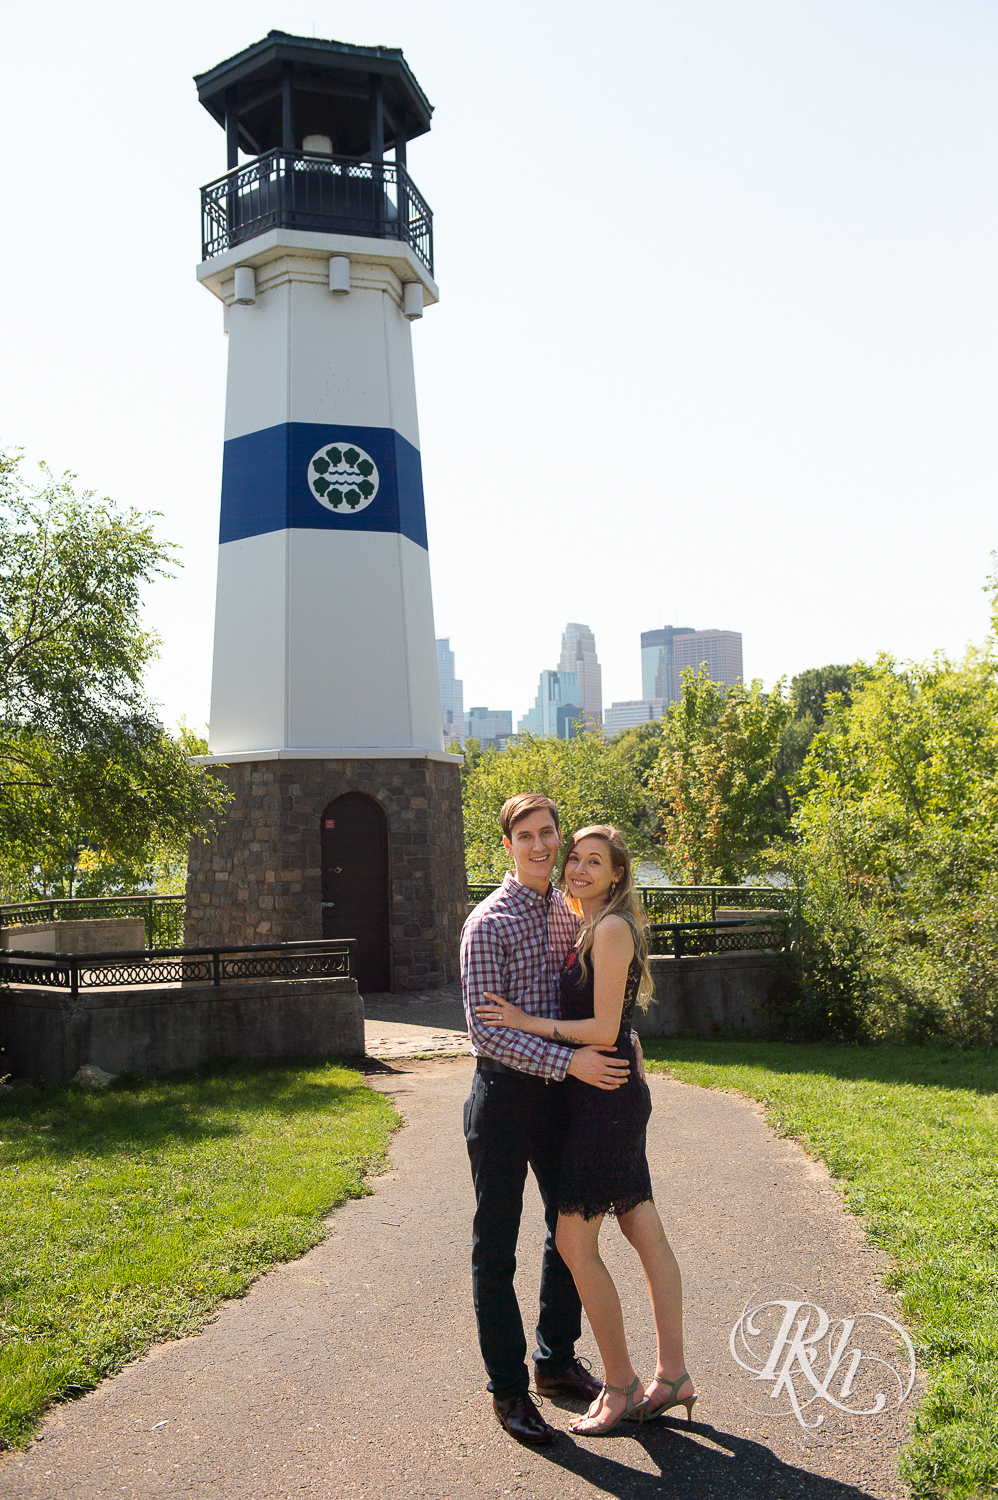 Man and woman in black lace dress smile in front of lighthouse during summer Boom Island Park engagement photos in Minneapolis, Minnesota.